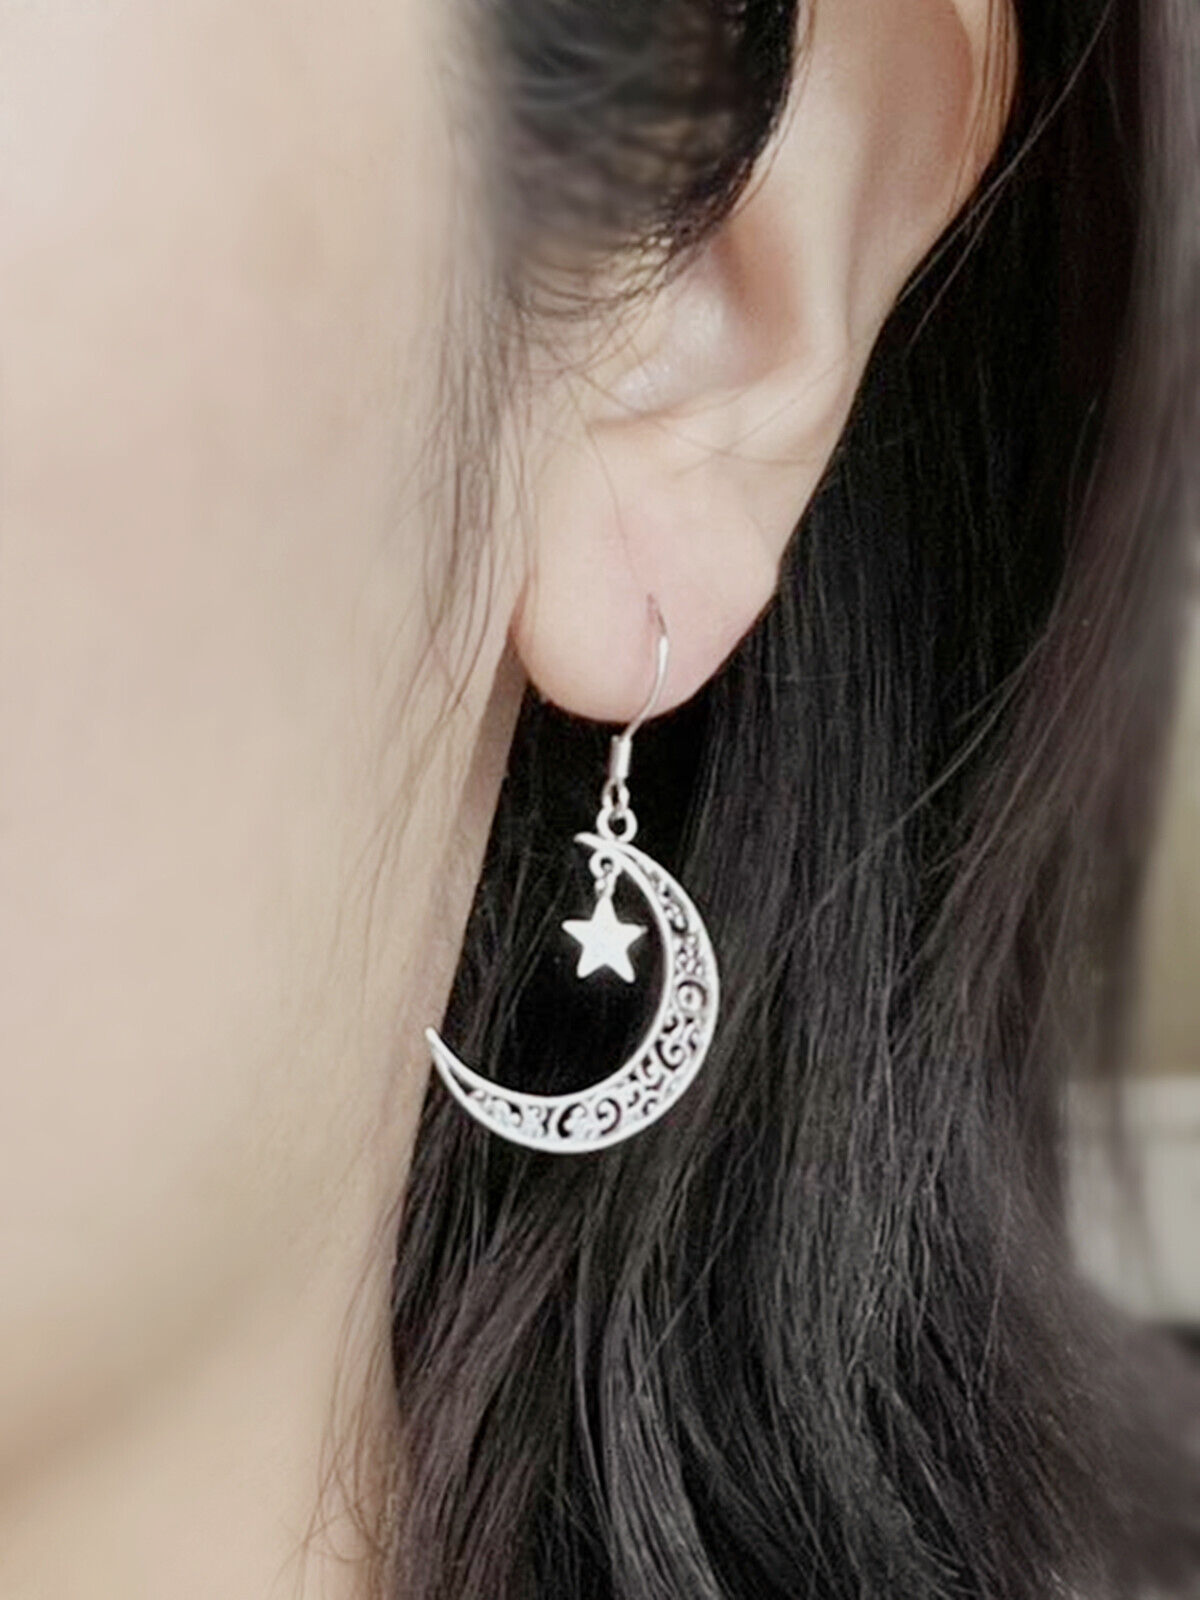 Sterling Silver Filigree Dangle Drop Earrings with Crescent Moon and Star - sugarkittenlondon